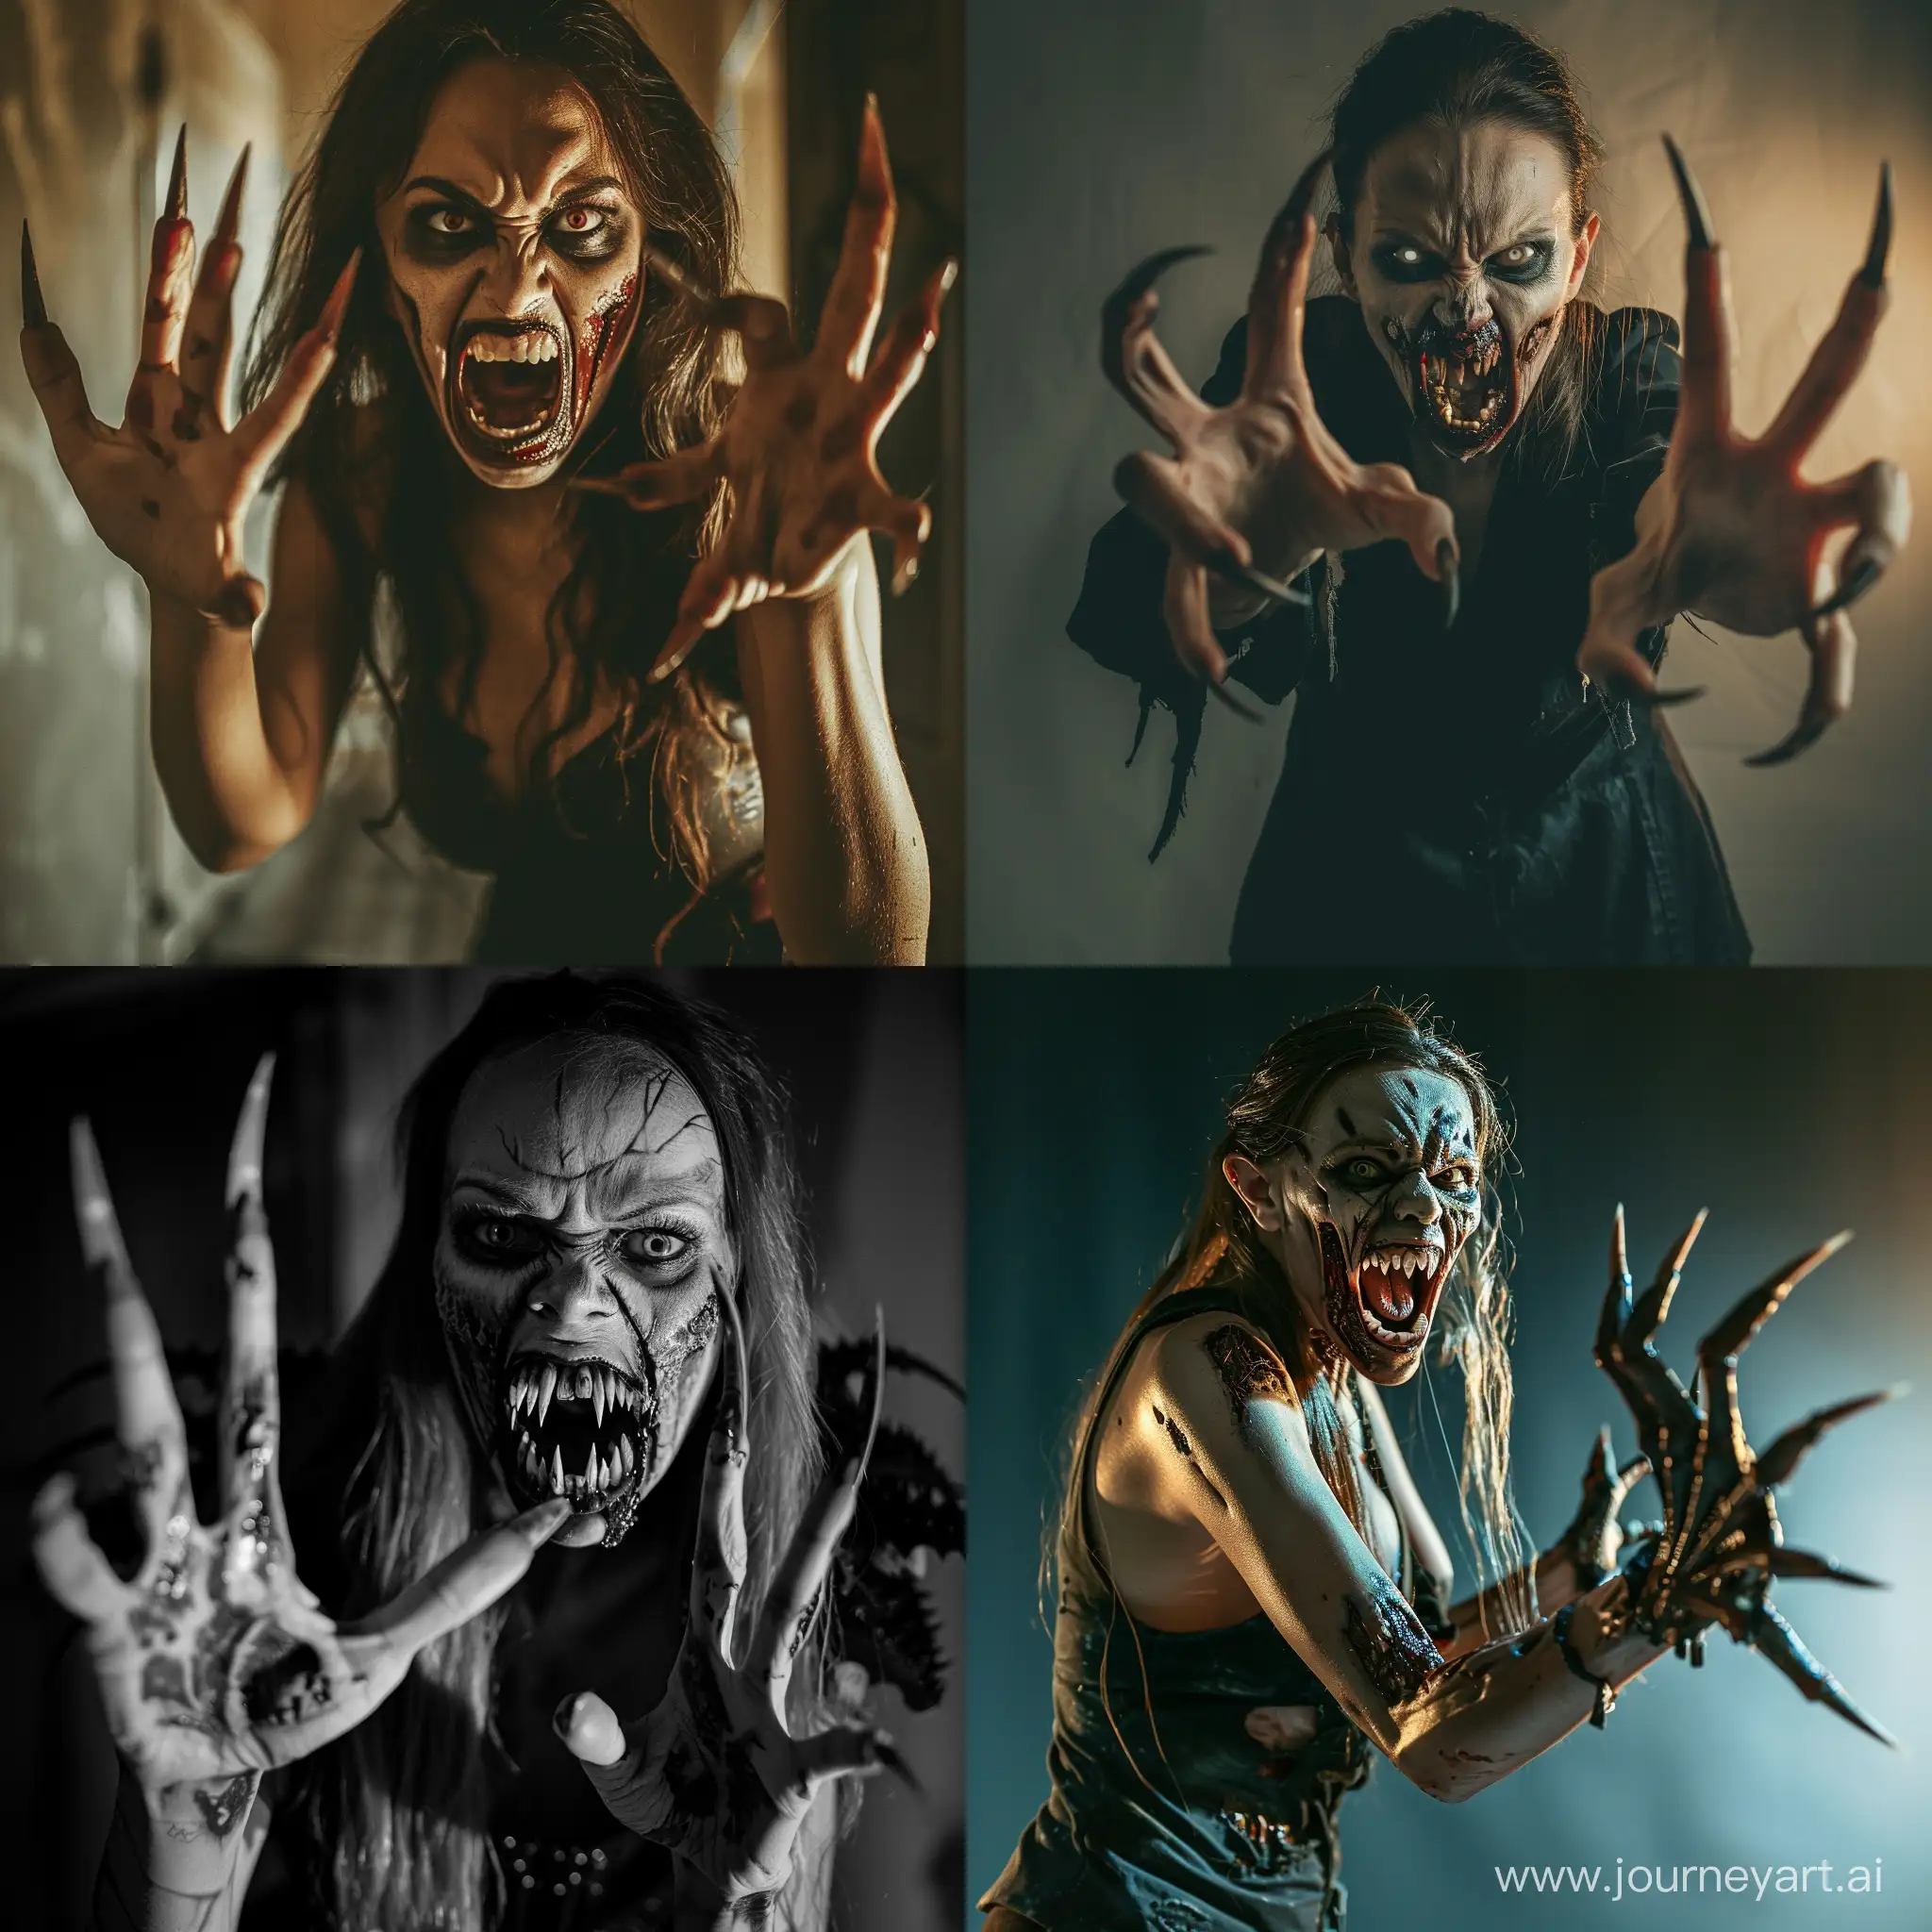 A horrible-looking zombie woman with long pointed nails on her five-fingered hands, her mouth dangerously open exposing a pointed row of fangs, she stands in a threatening pose, ready to attack her victim